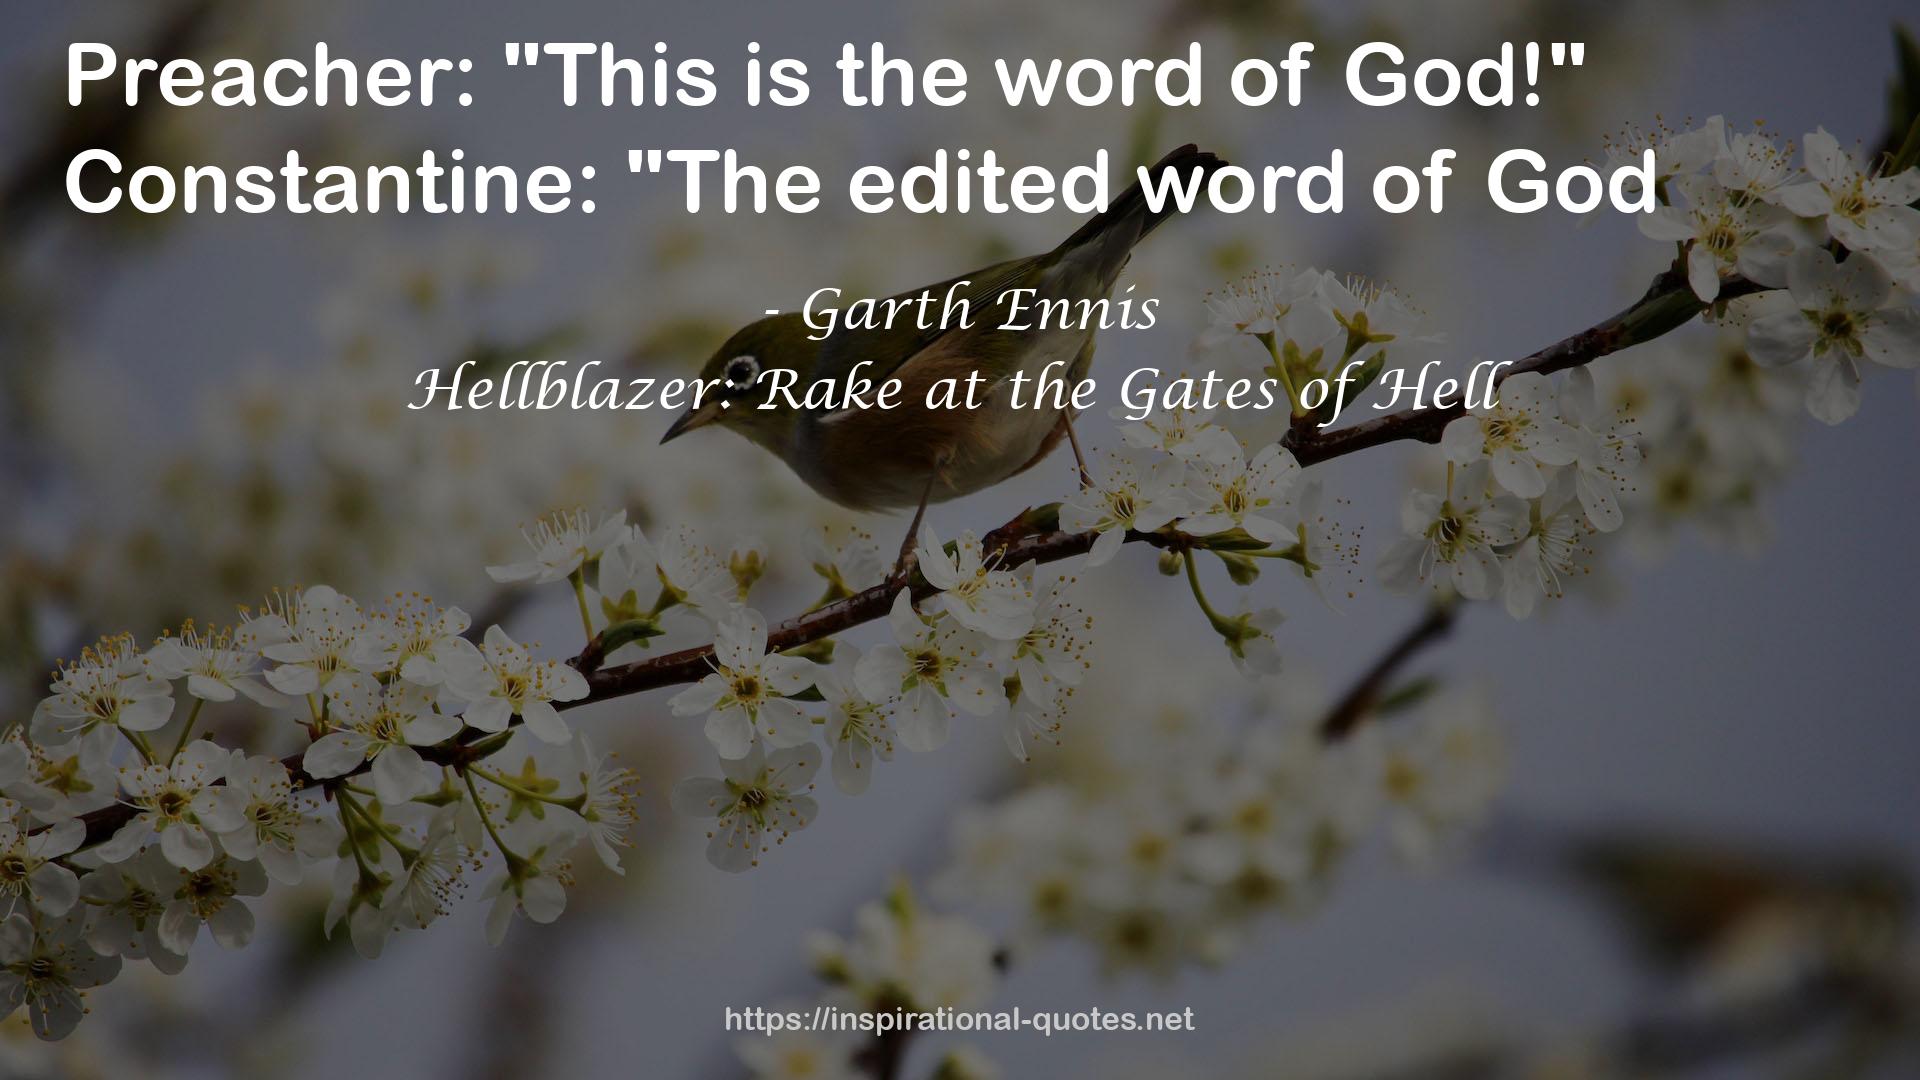 Hellblazer: Rake at the Gates of Hell QUOTES